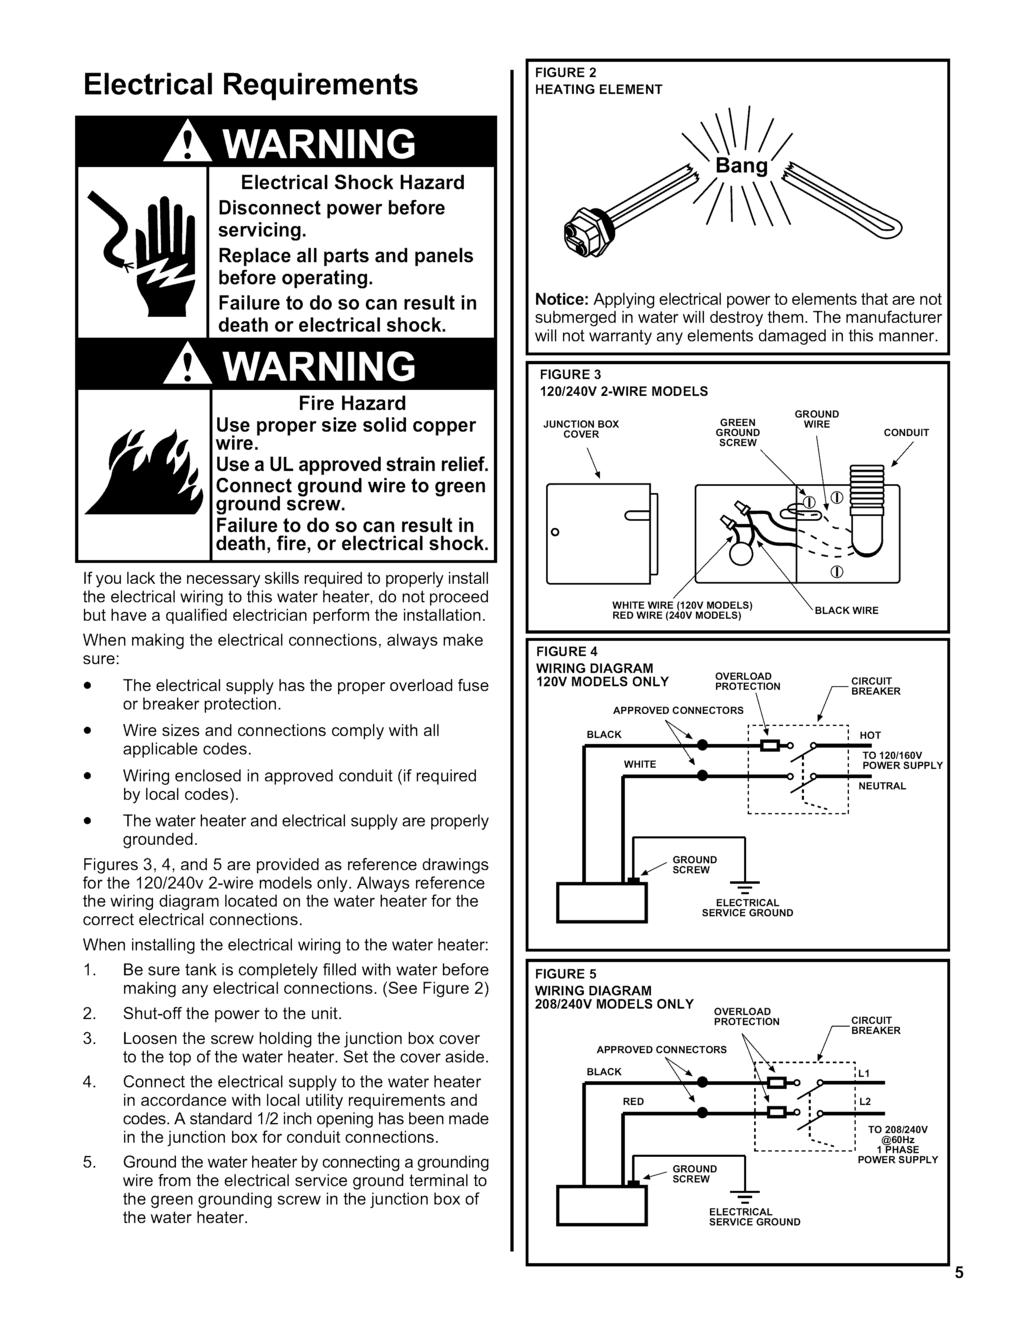 Electrical Requirements FIGURE 2 HEATING ELEMENT \ / Electrical Shock Hazard Disconnect power before servicing. Replace all parts and panels before operating.